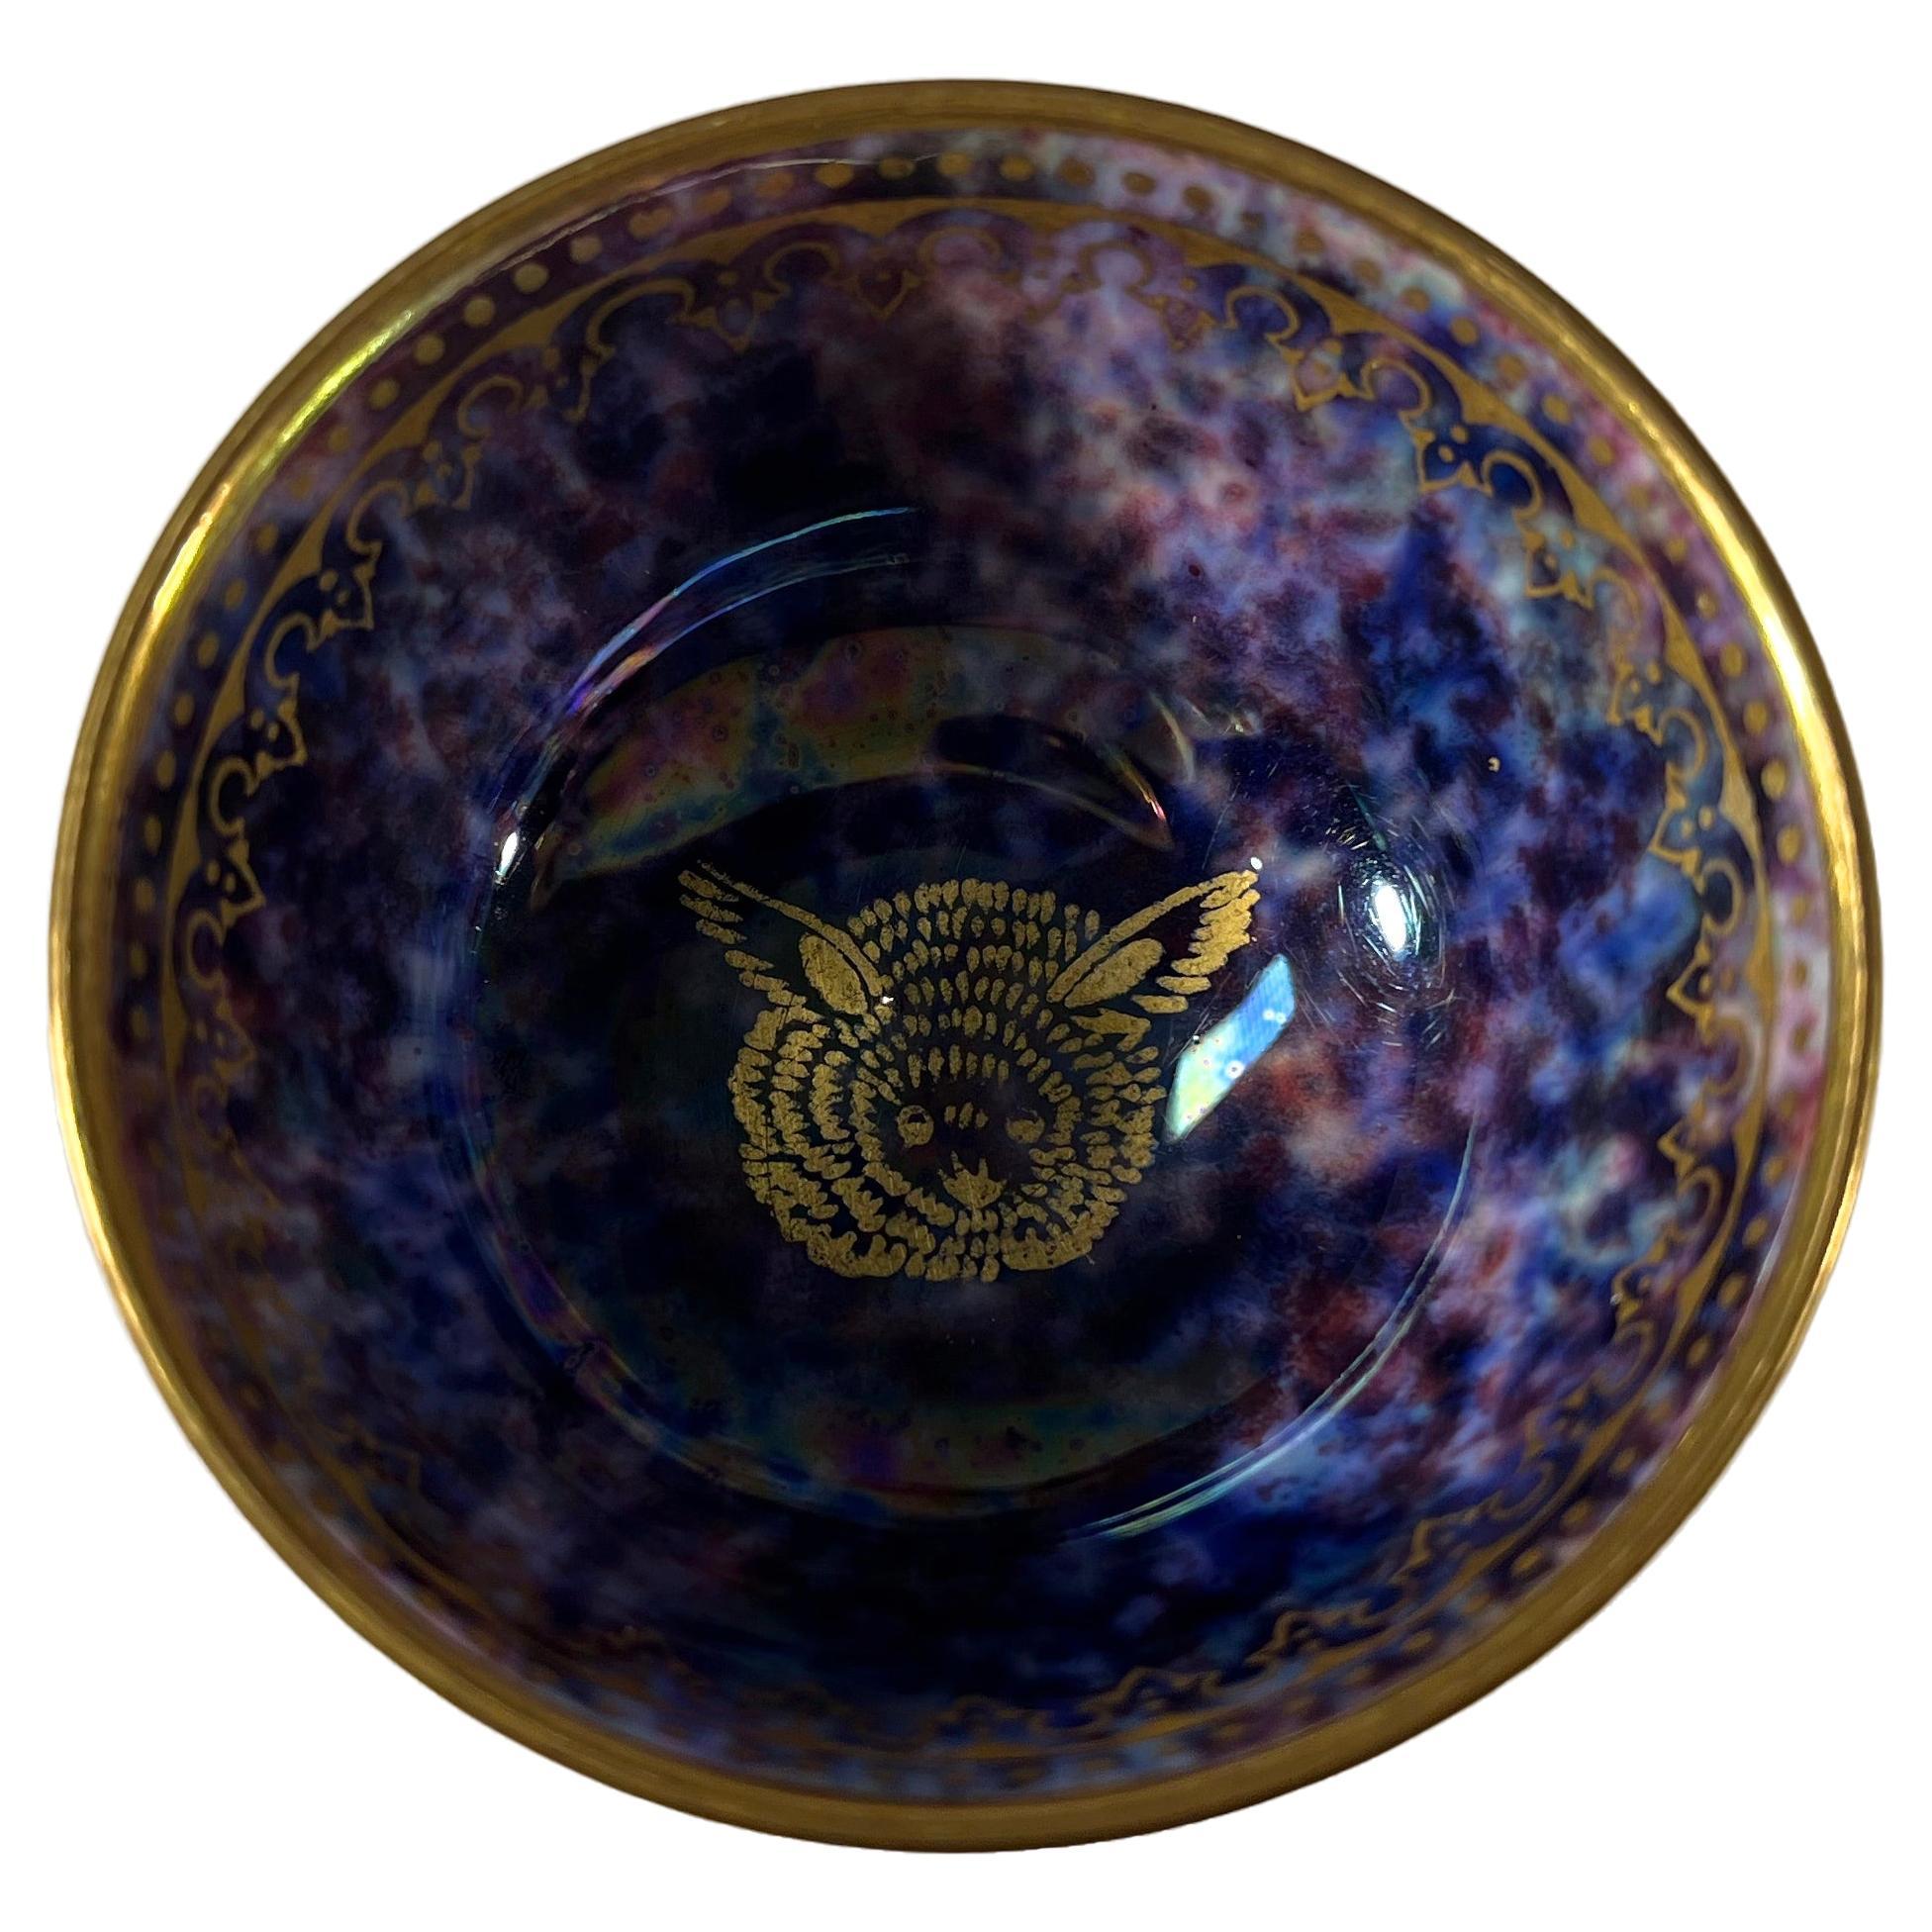 Fabulous gilded, a 'strange large eared creature' decorates the interior of this miniature bowl by Daisy Makeig-Jones for Wedgwood
Miniature bone china lustre tea bowl gilded in filigree to inner and outer rims
The interior is decorated with indigo